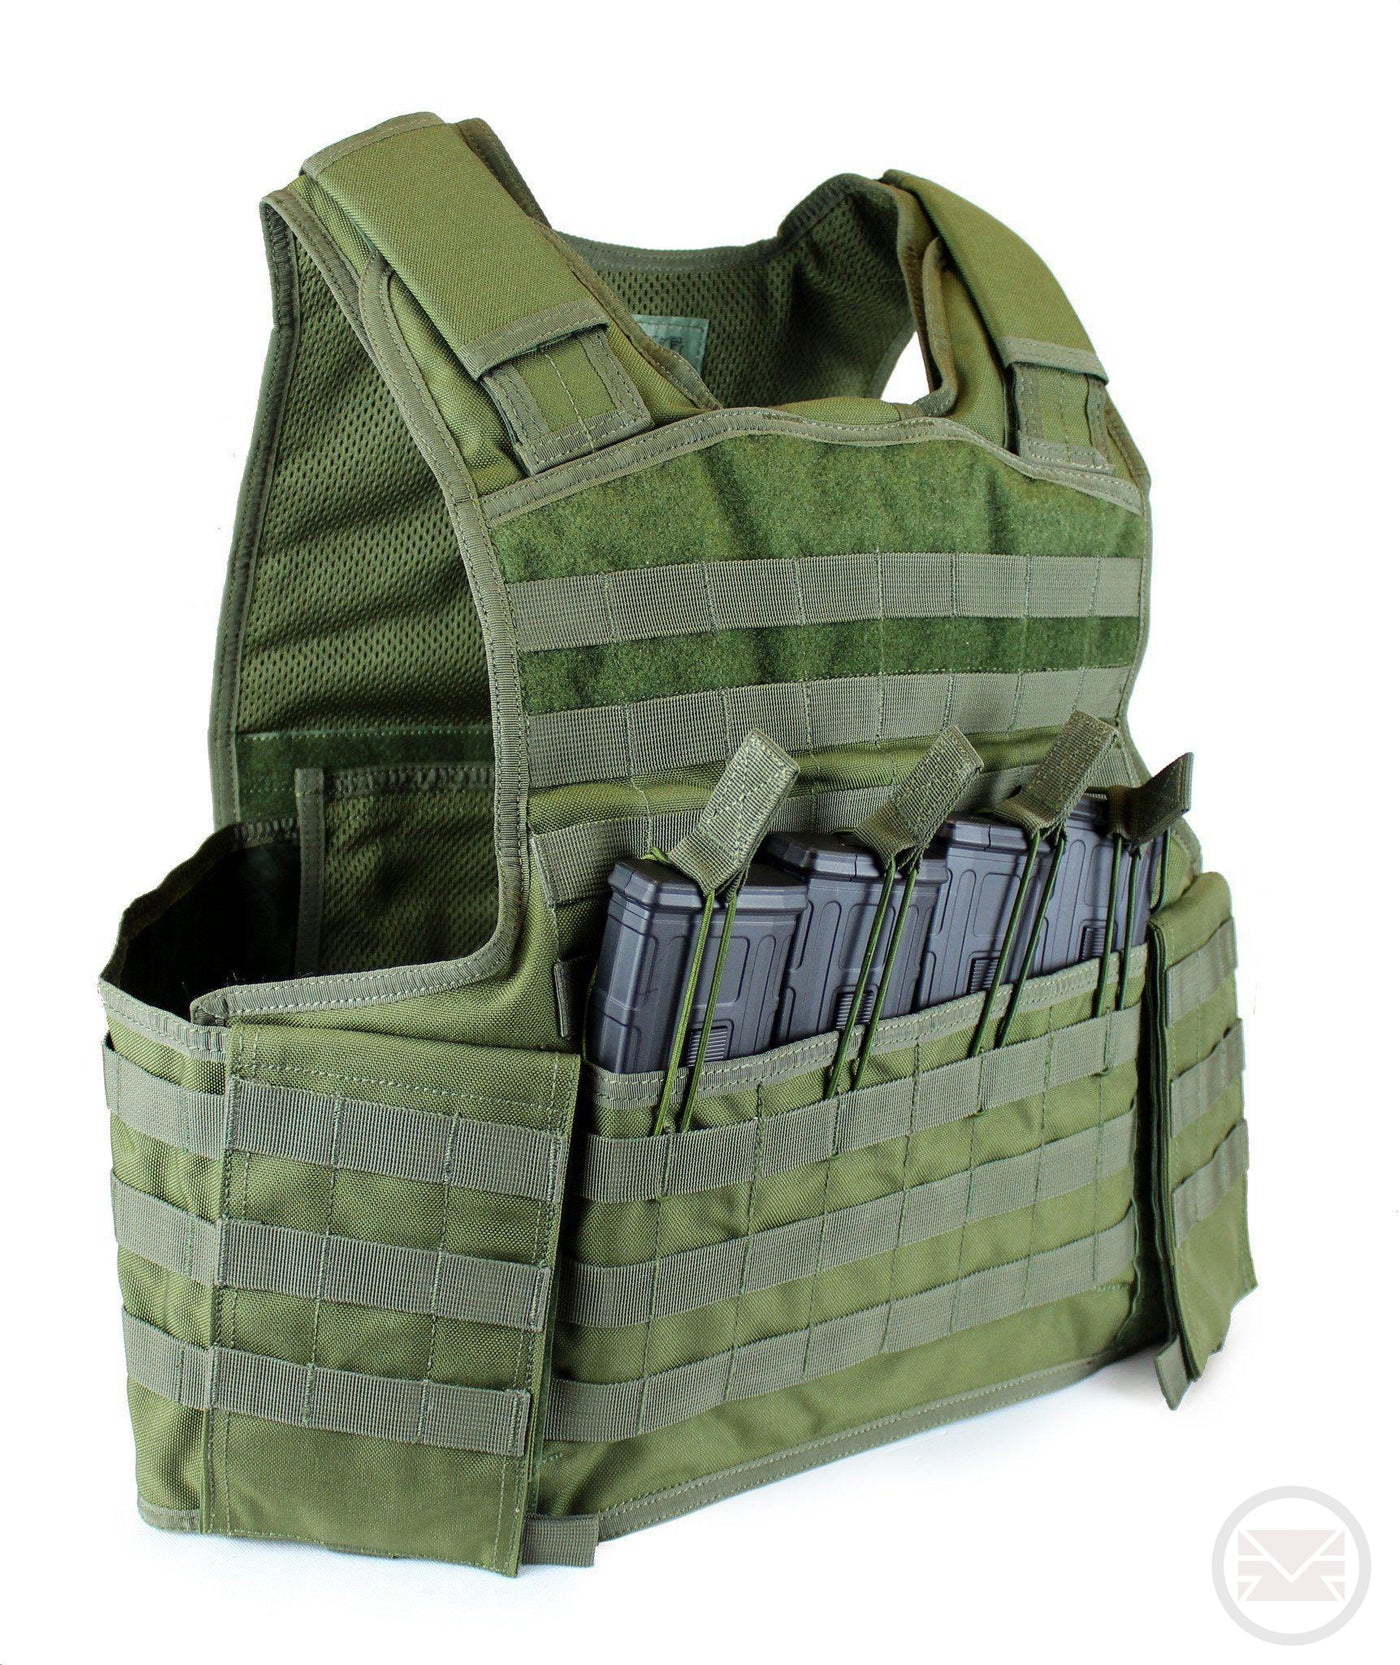 Olive Grenadier Molle Vest with Integrated Magazine Pouches 